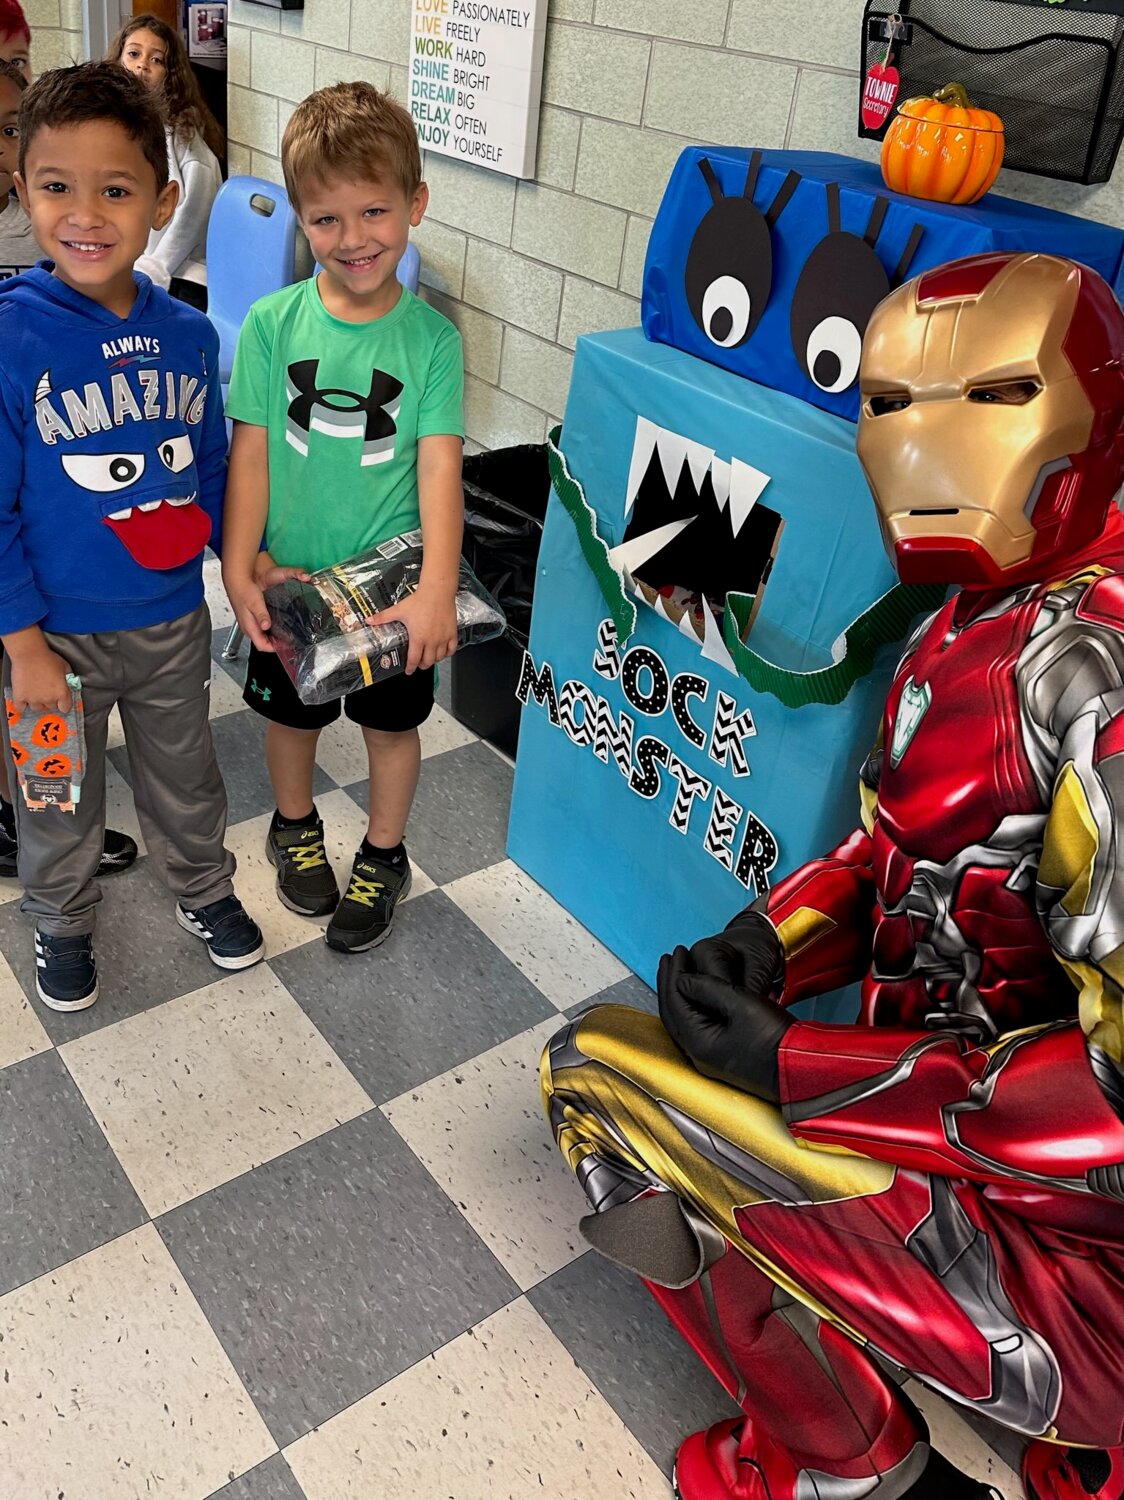 Kindergarten students, Luca and Daniel feed the Sock Monster socks with special guest, Iron Man!